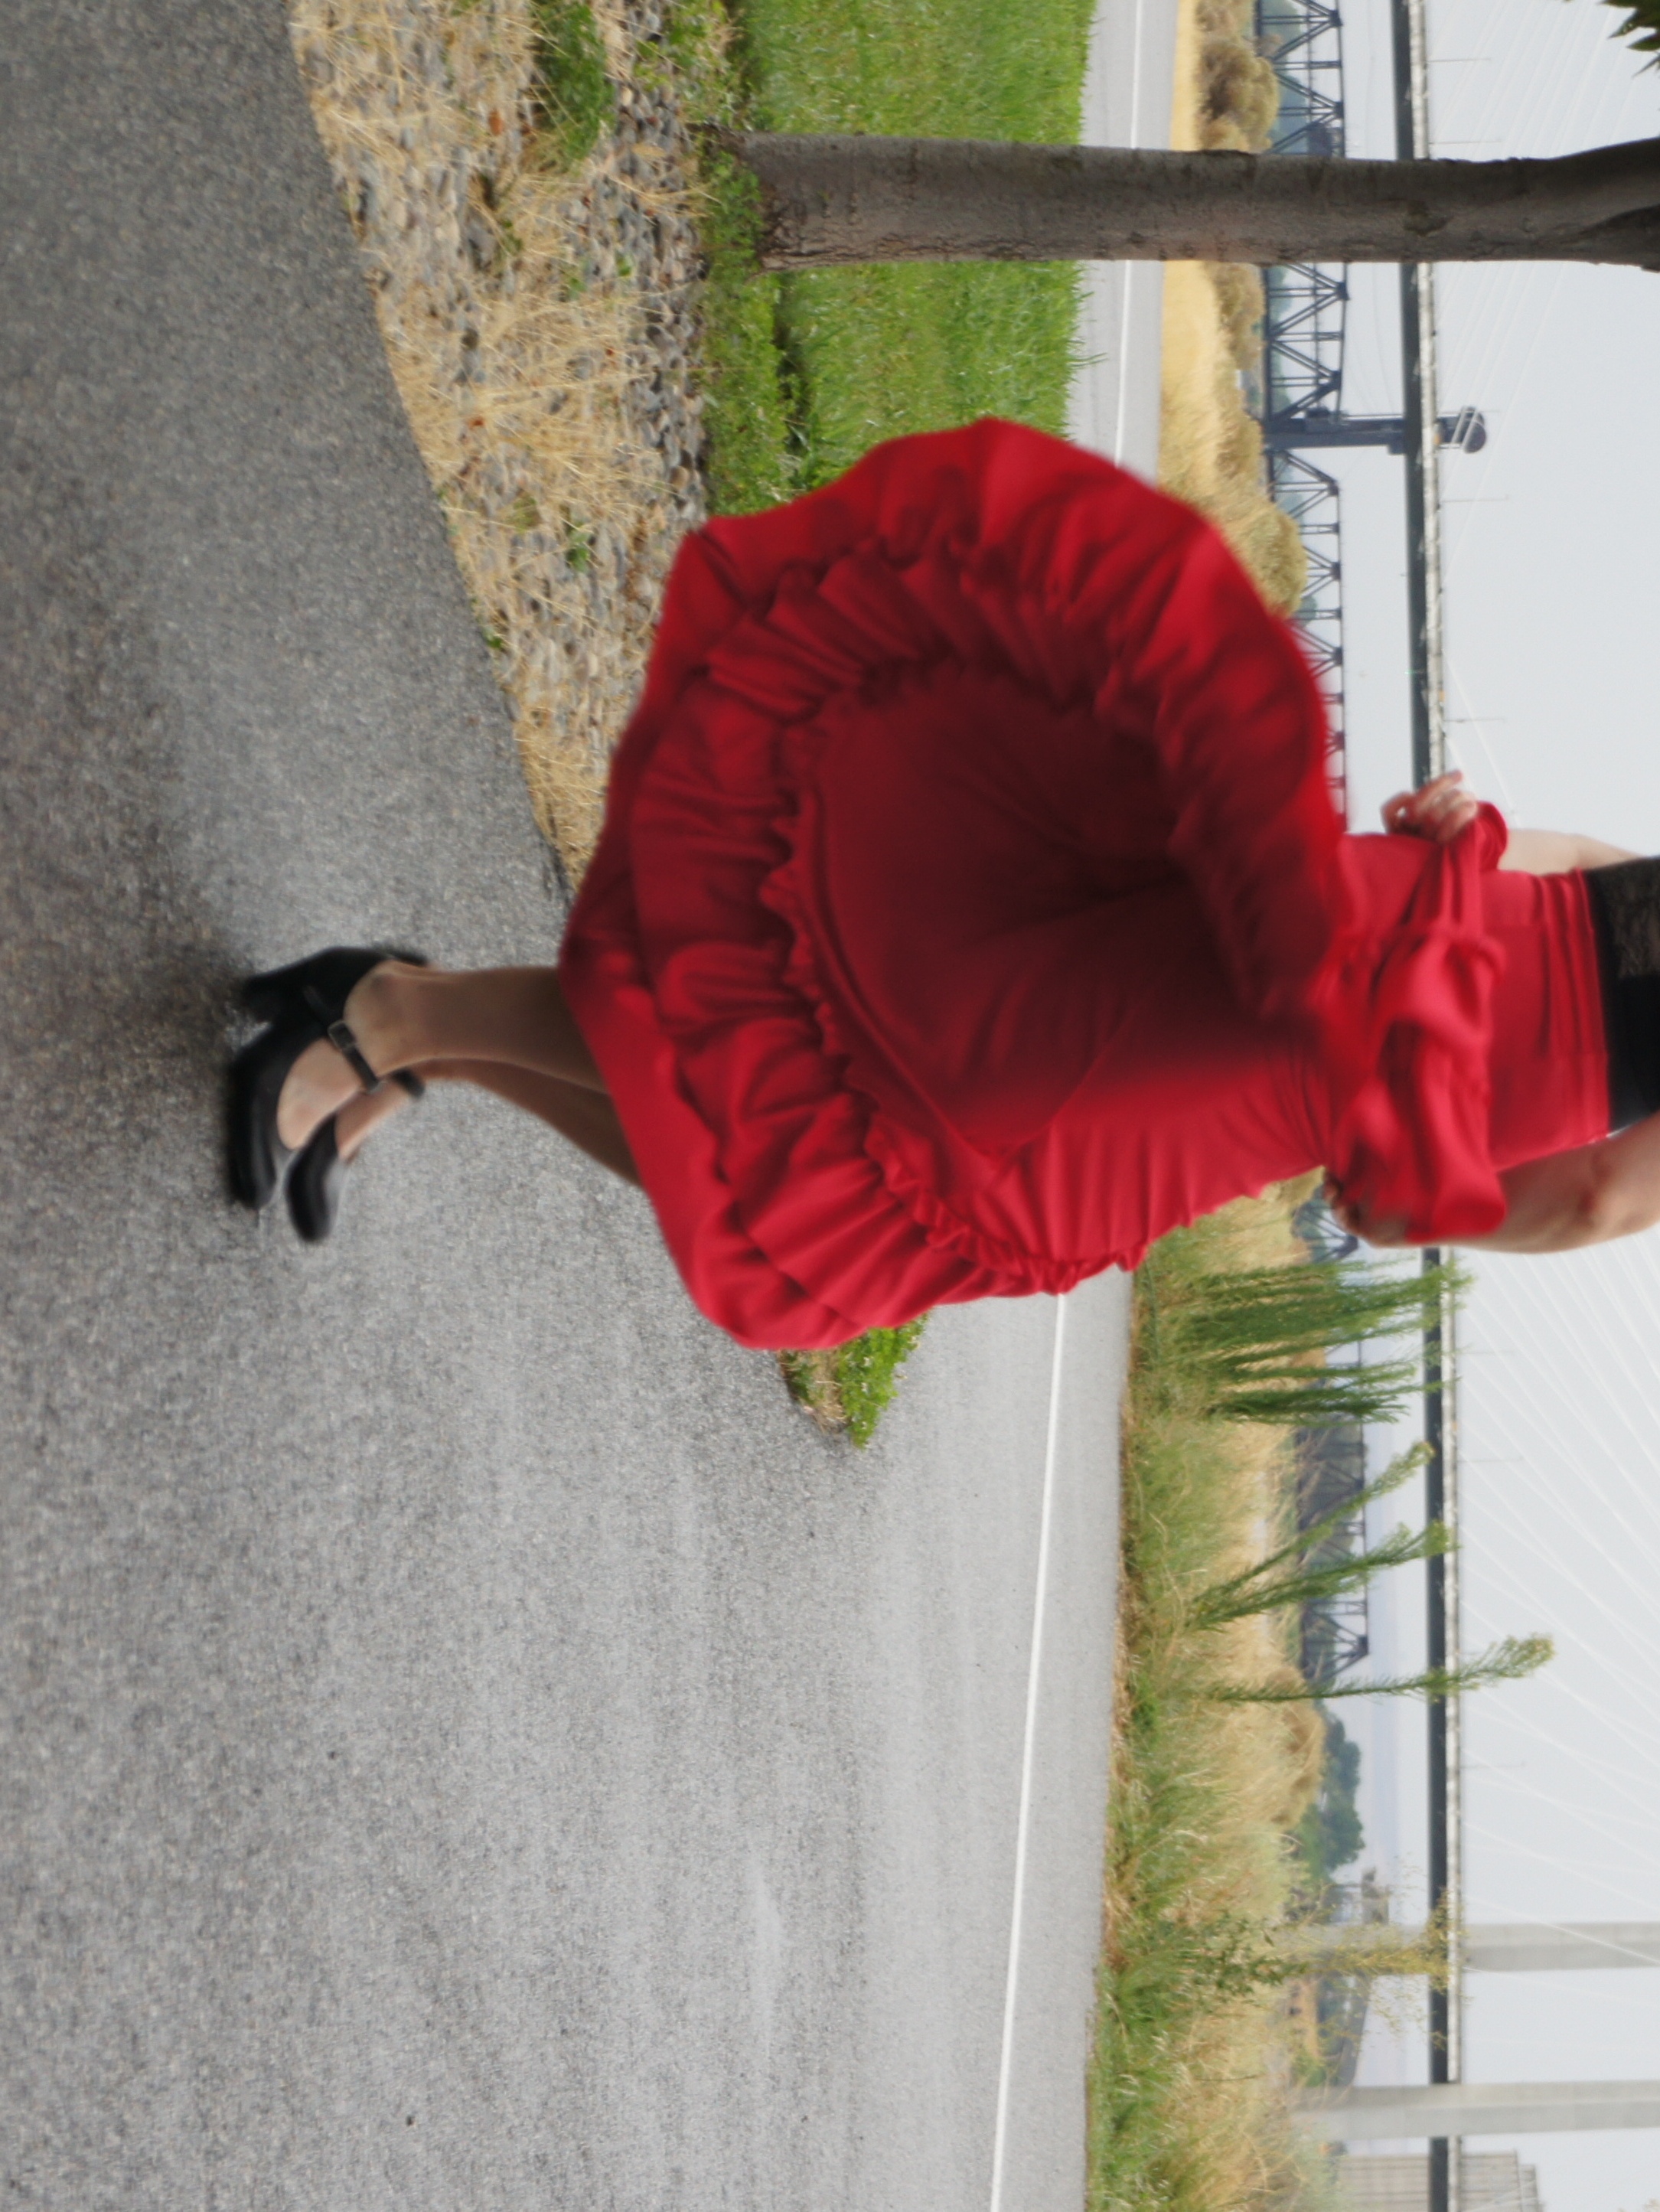 Instructor Kate Feinberg Robins wooshes a red flamenco skirt in a circular motion while performing footwork in black flamenco shoes on a bicycle path in front of a bridge